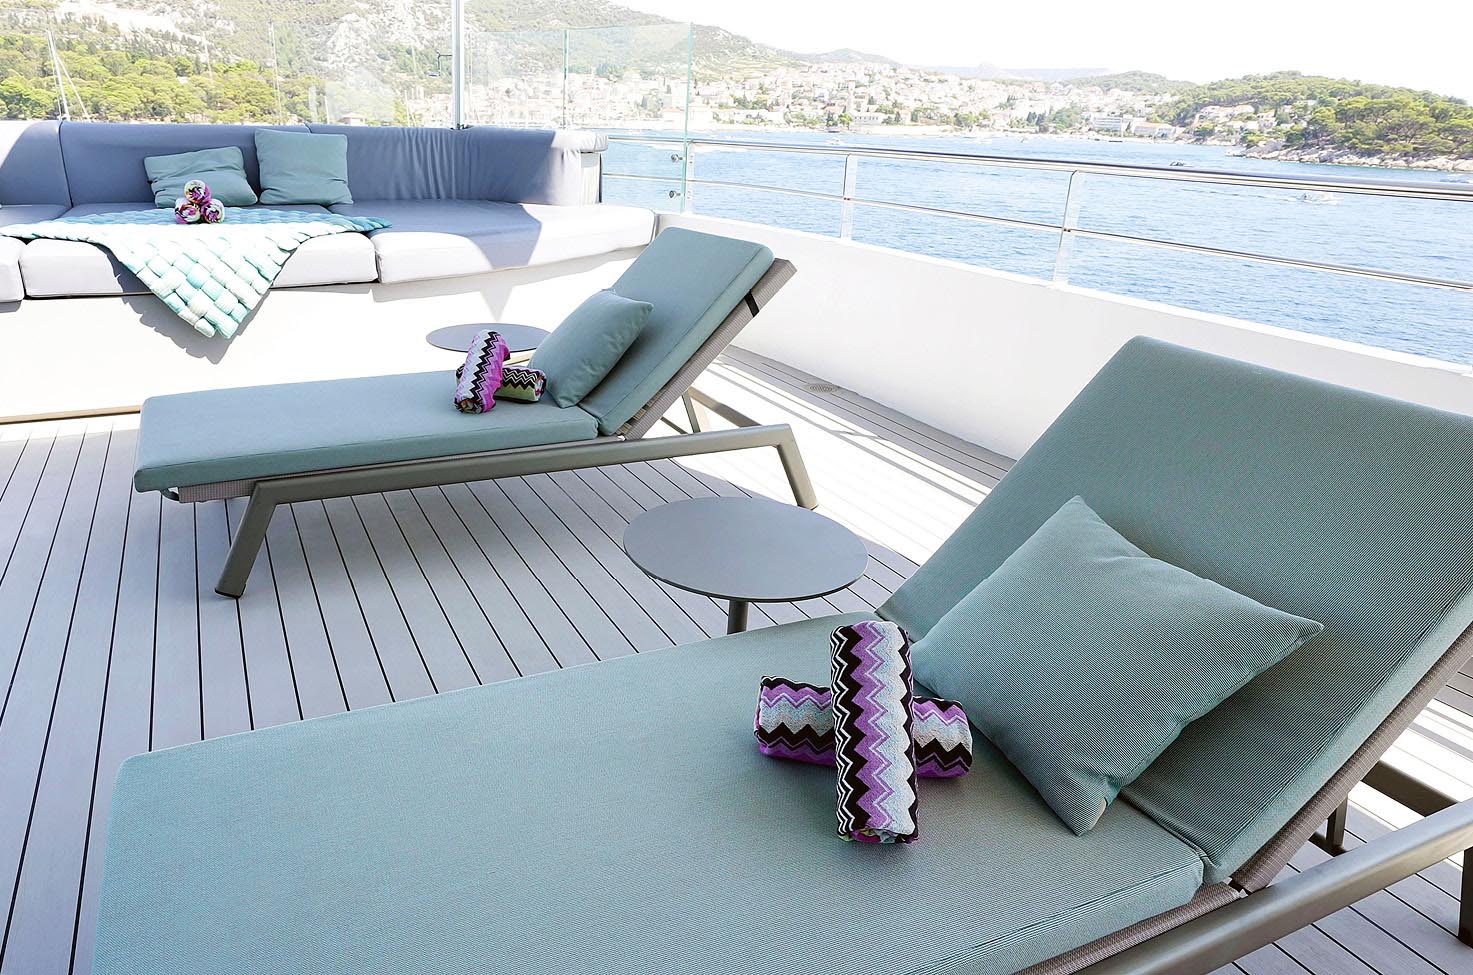 Two sun loungers and a separate seating space set up on deck, with a city in the background